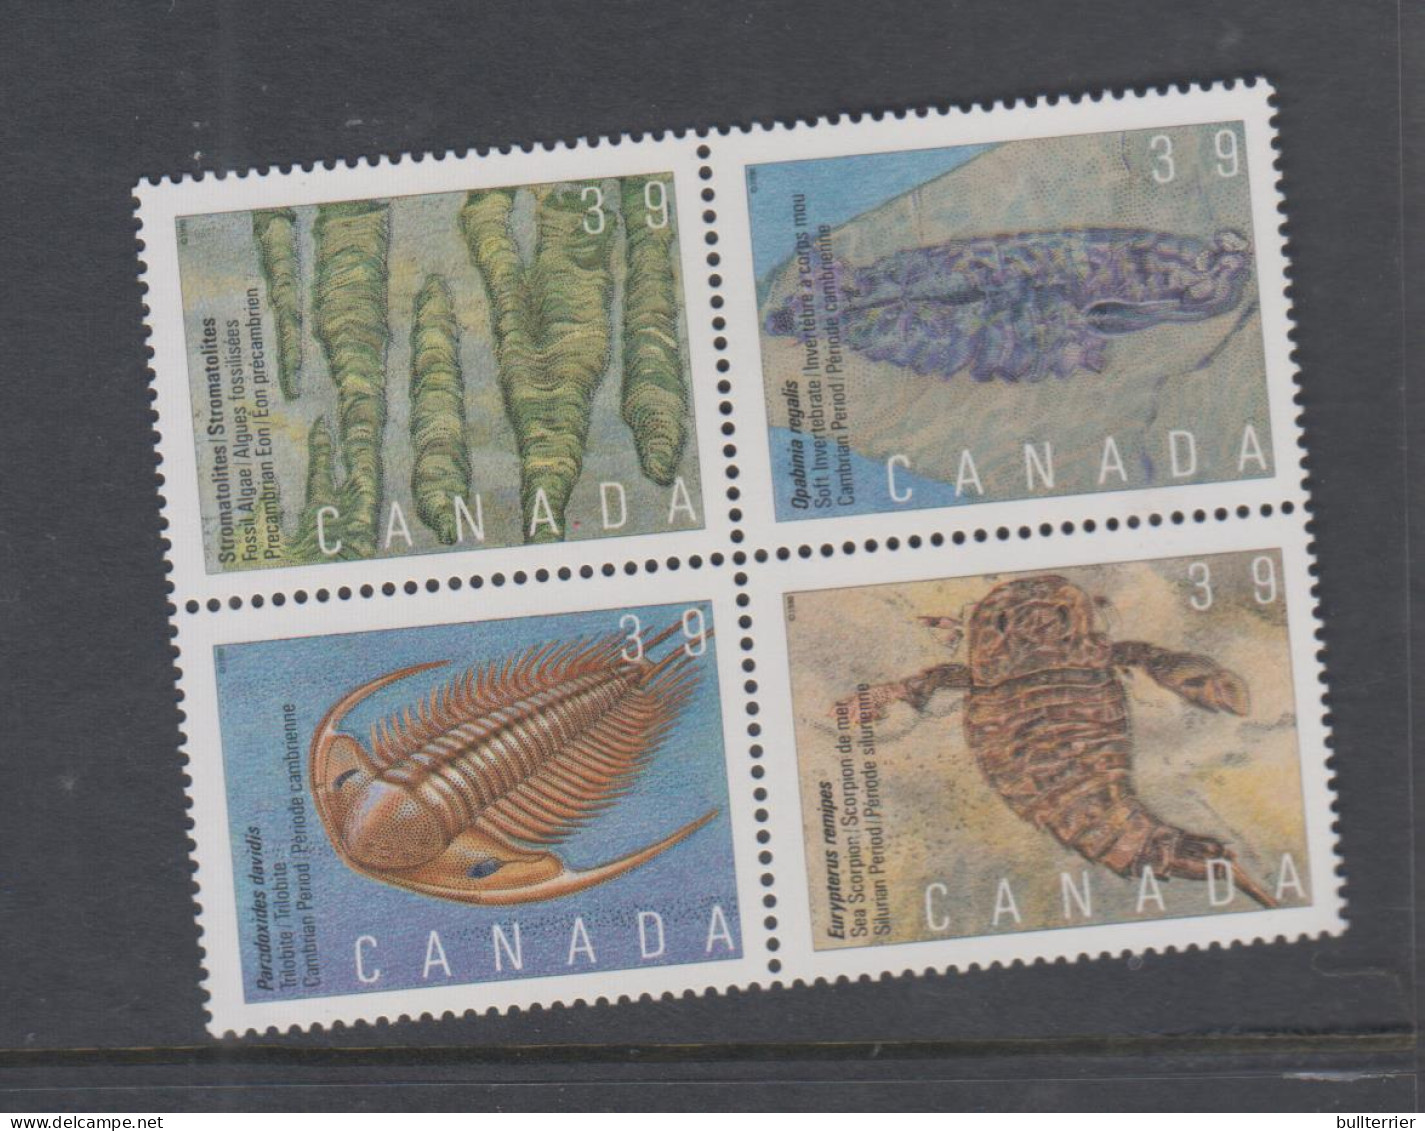 FOSSILS - CANADA  - FOSSILS SET OF 4 IN BLOCK  MINT NEVER HINGED - Fossielen